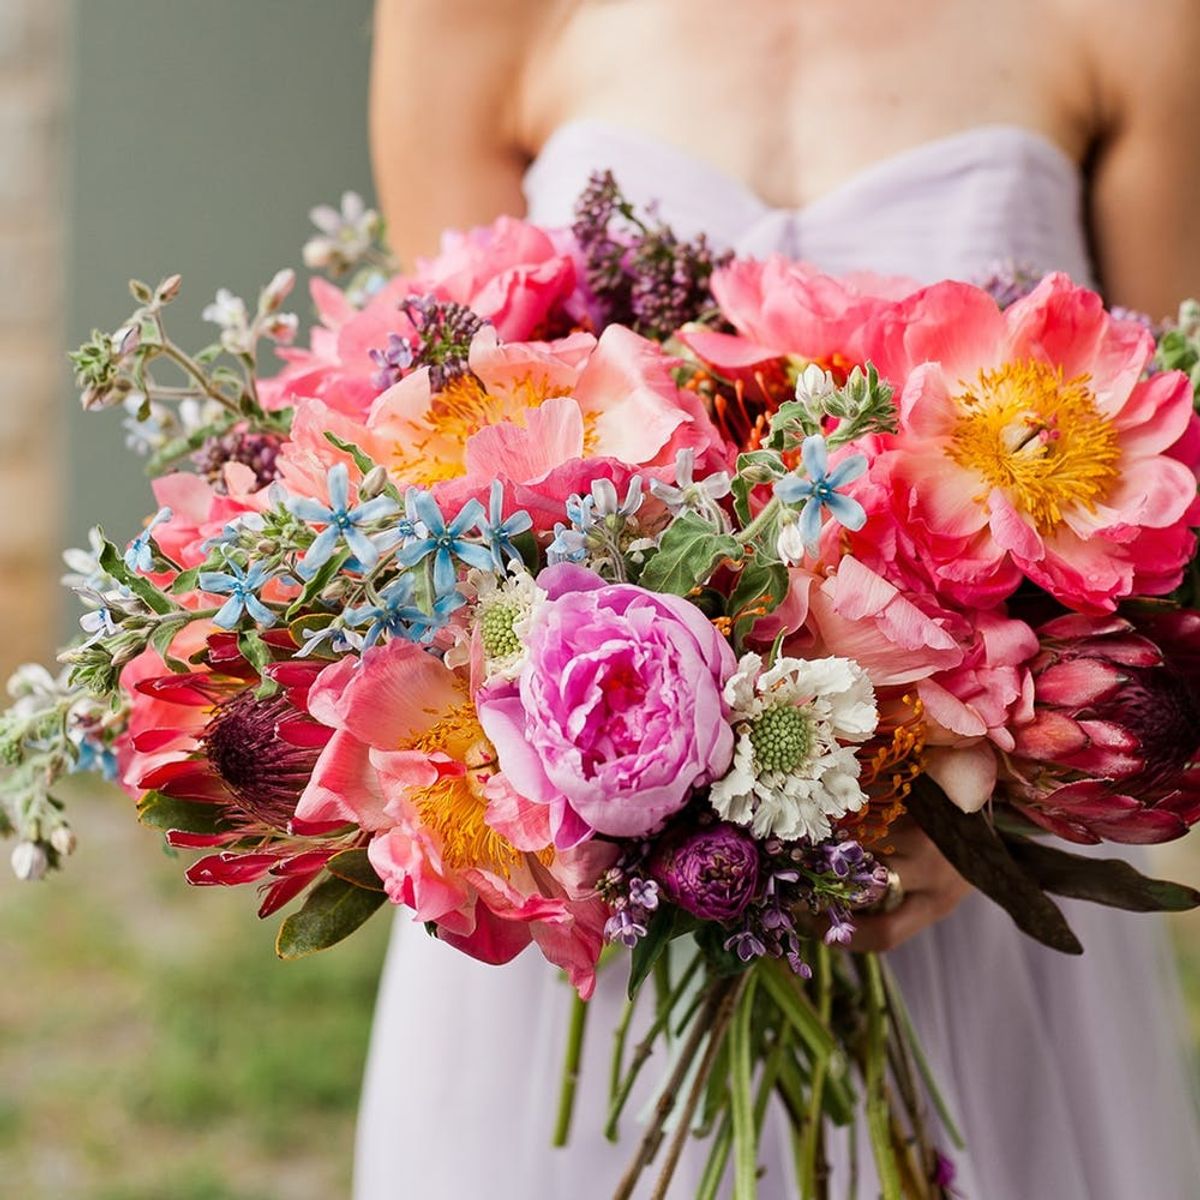 Check Out This Stunning Wedding Bouquet You Can DIY